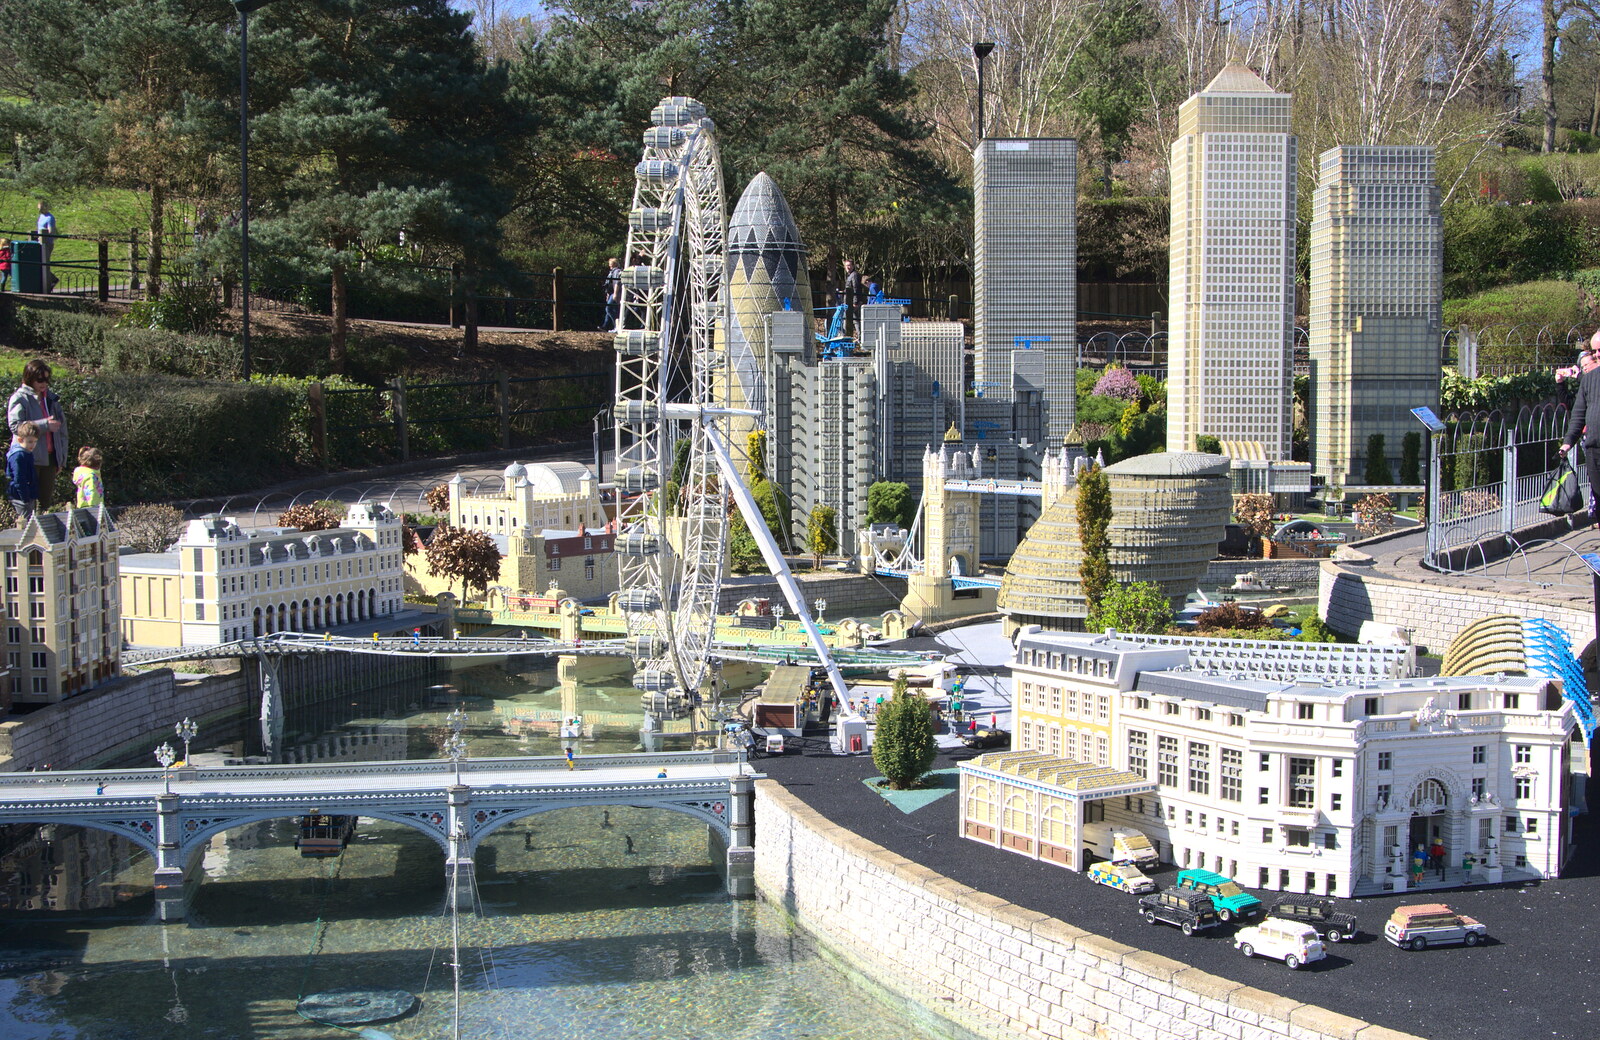 A Lego City of London from A Trip to Legoland, Windsor, Berkshire - 25th March 2017